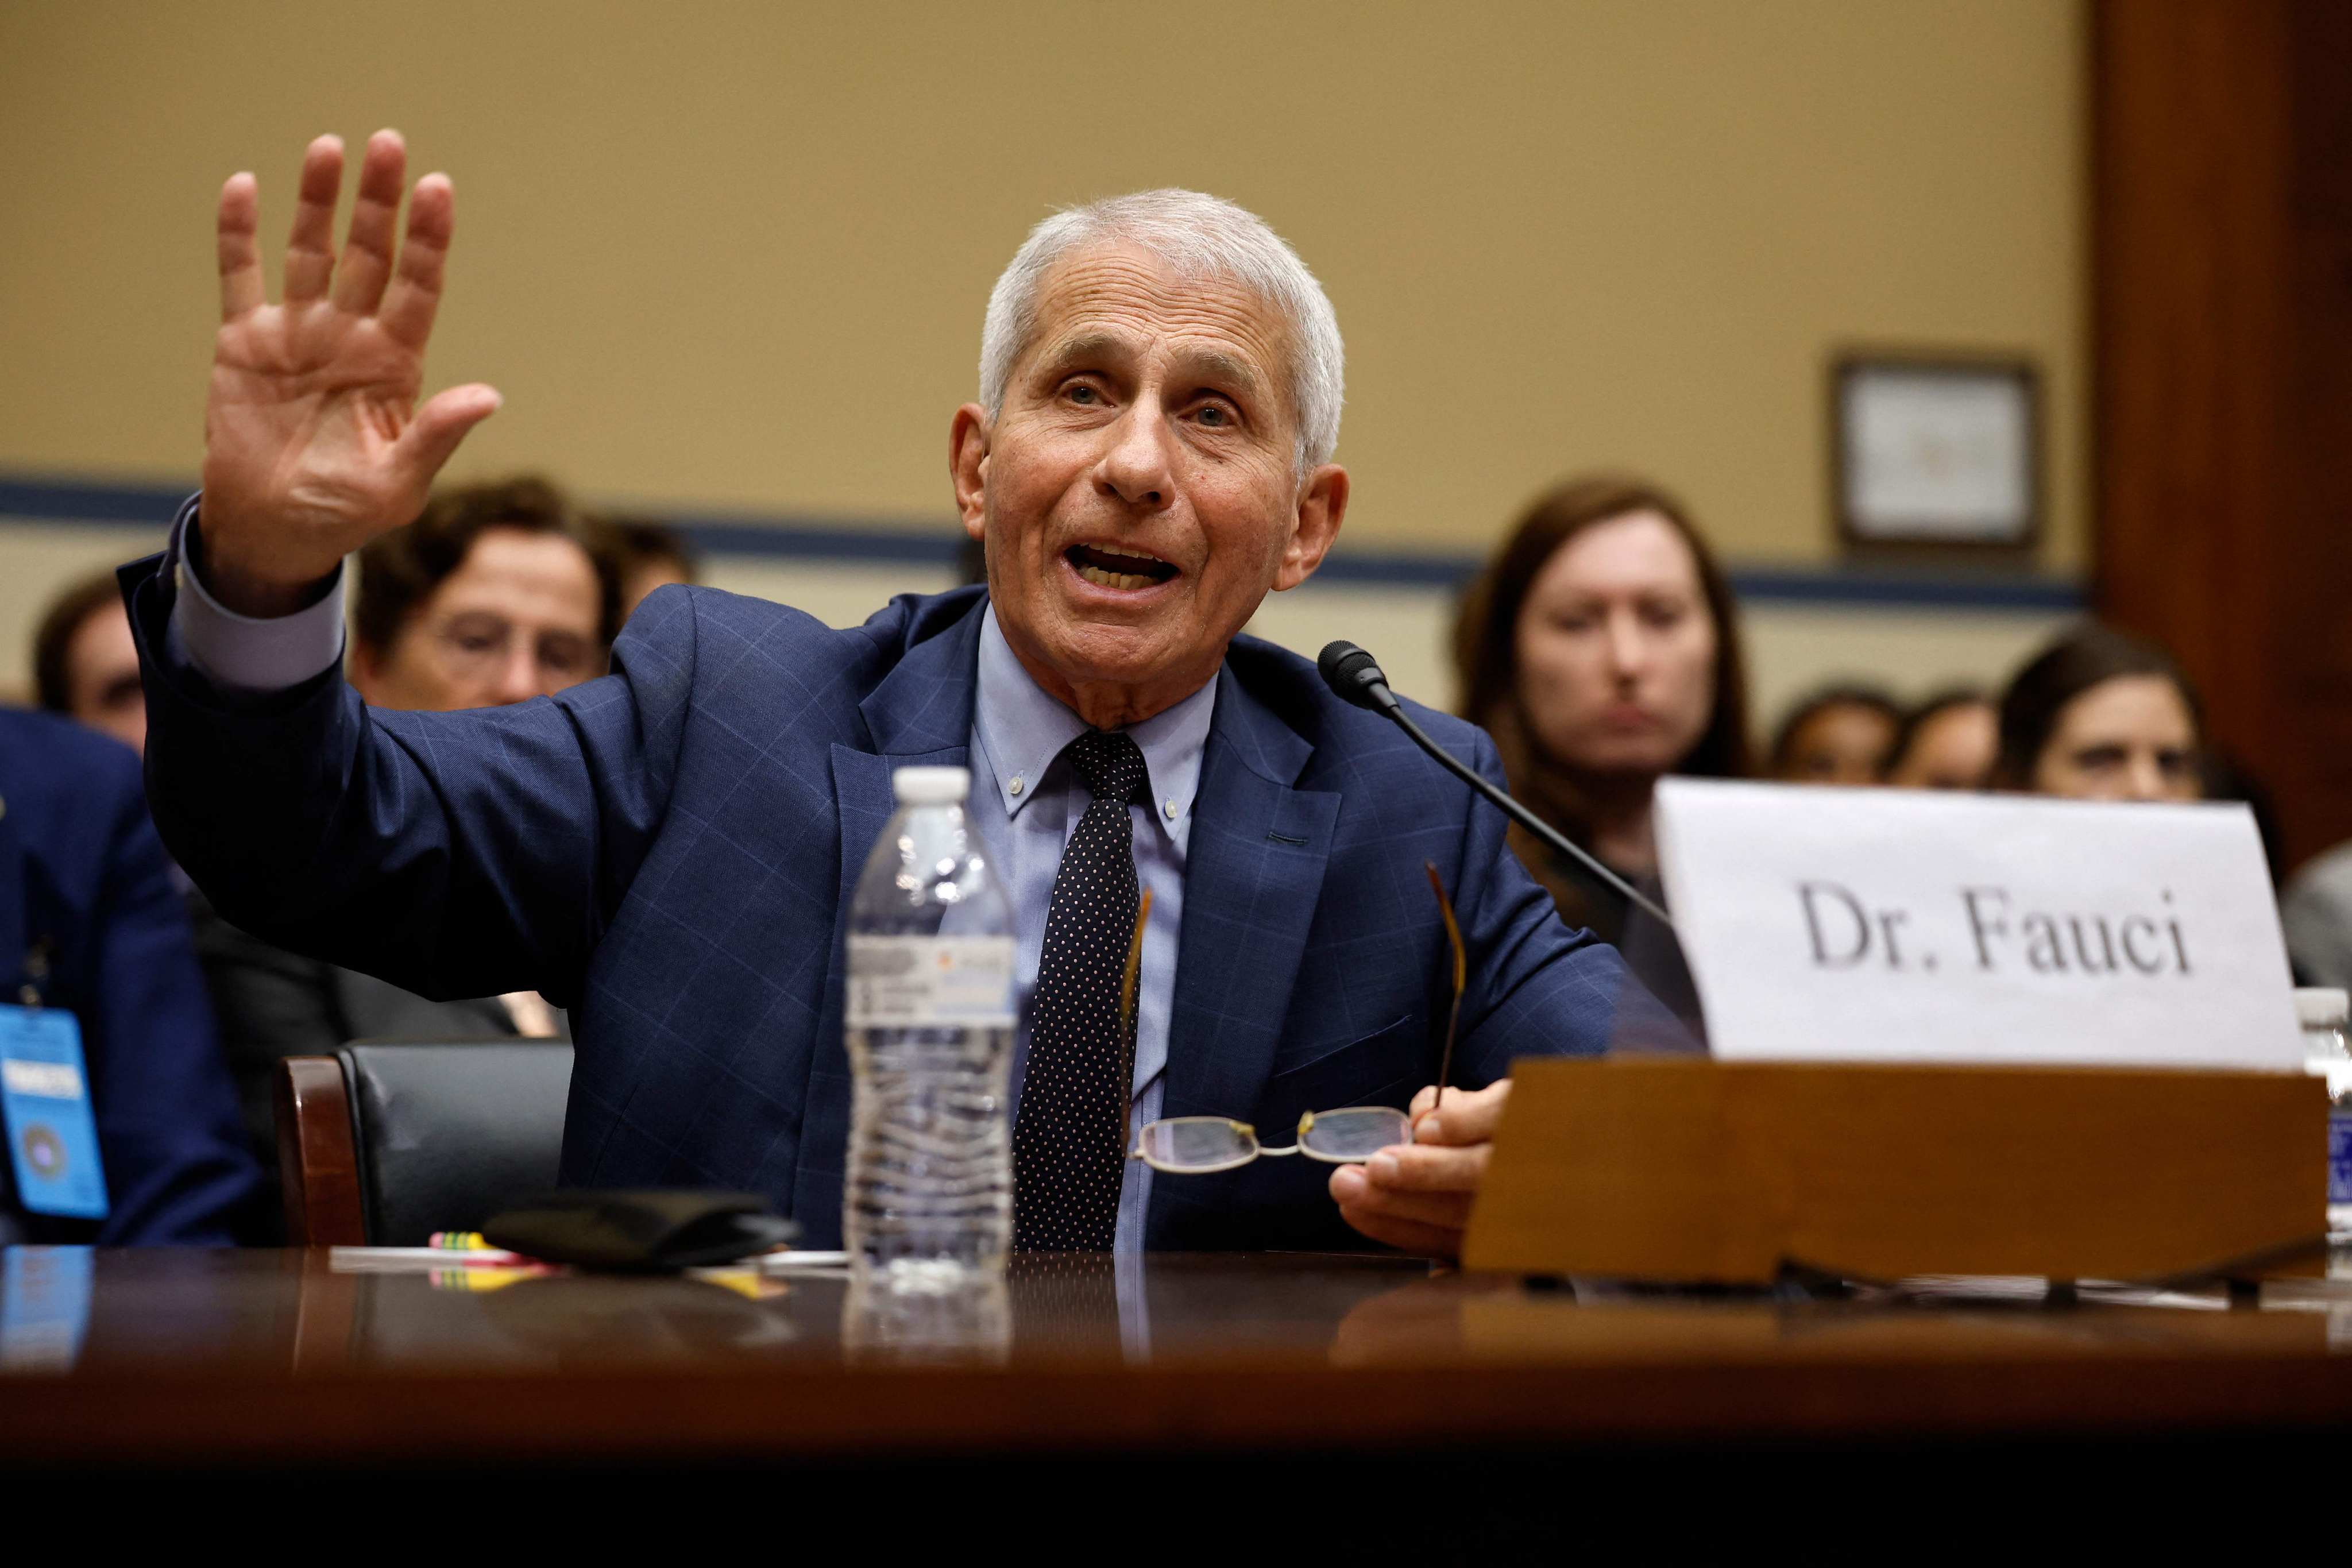 Dr Anthony Fauci, former director of the National Institute of Allergy and Infectious Diseases, testifies in Washington on Monday. Photo: Getty Images/AFP